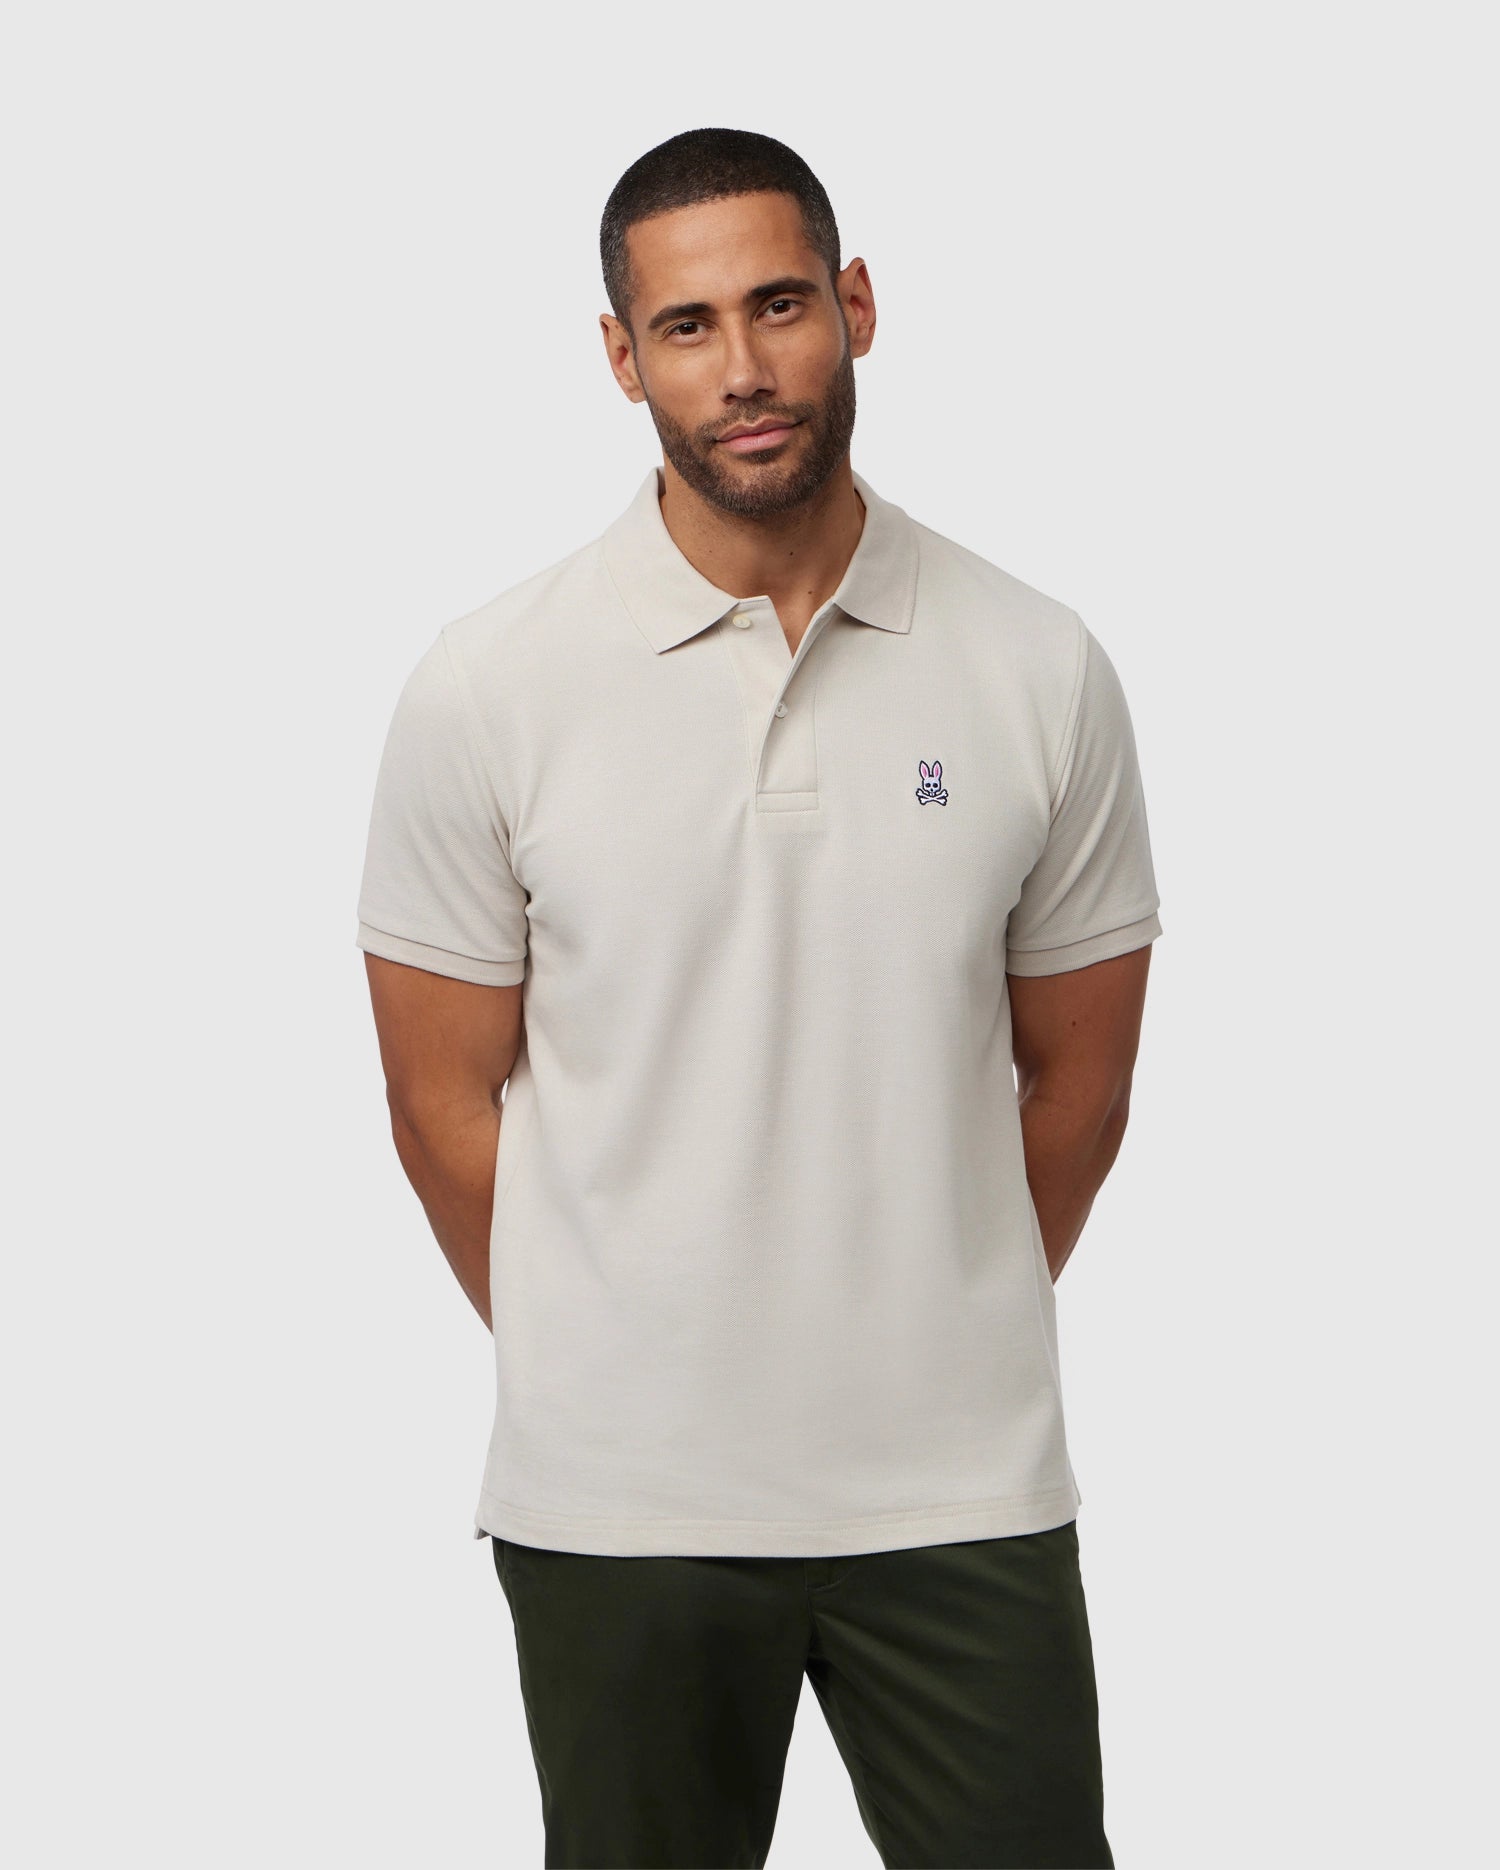 A man with short hair and a beard is wearing a luxurious Psycho Bunny MENS CLASSIC PIQUE POLO SHIRT - B6K001B200 with a small embroidered rabbit logo on the chest. Standing against a plain white background with his hands behind his back, he completes his timeless look with dark green pants.